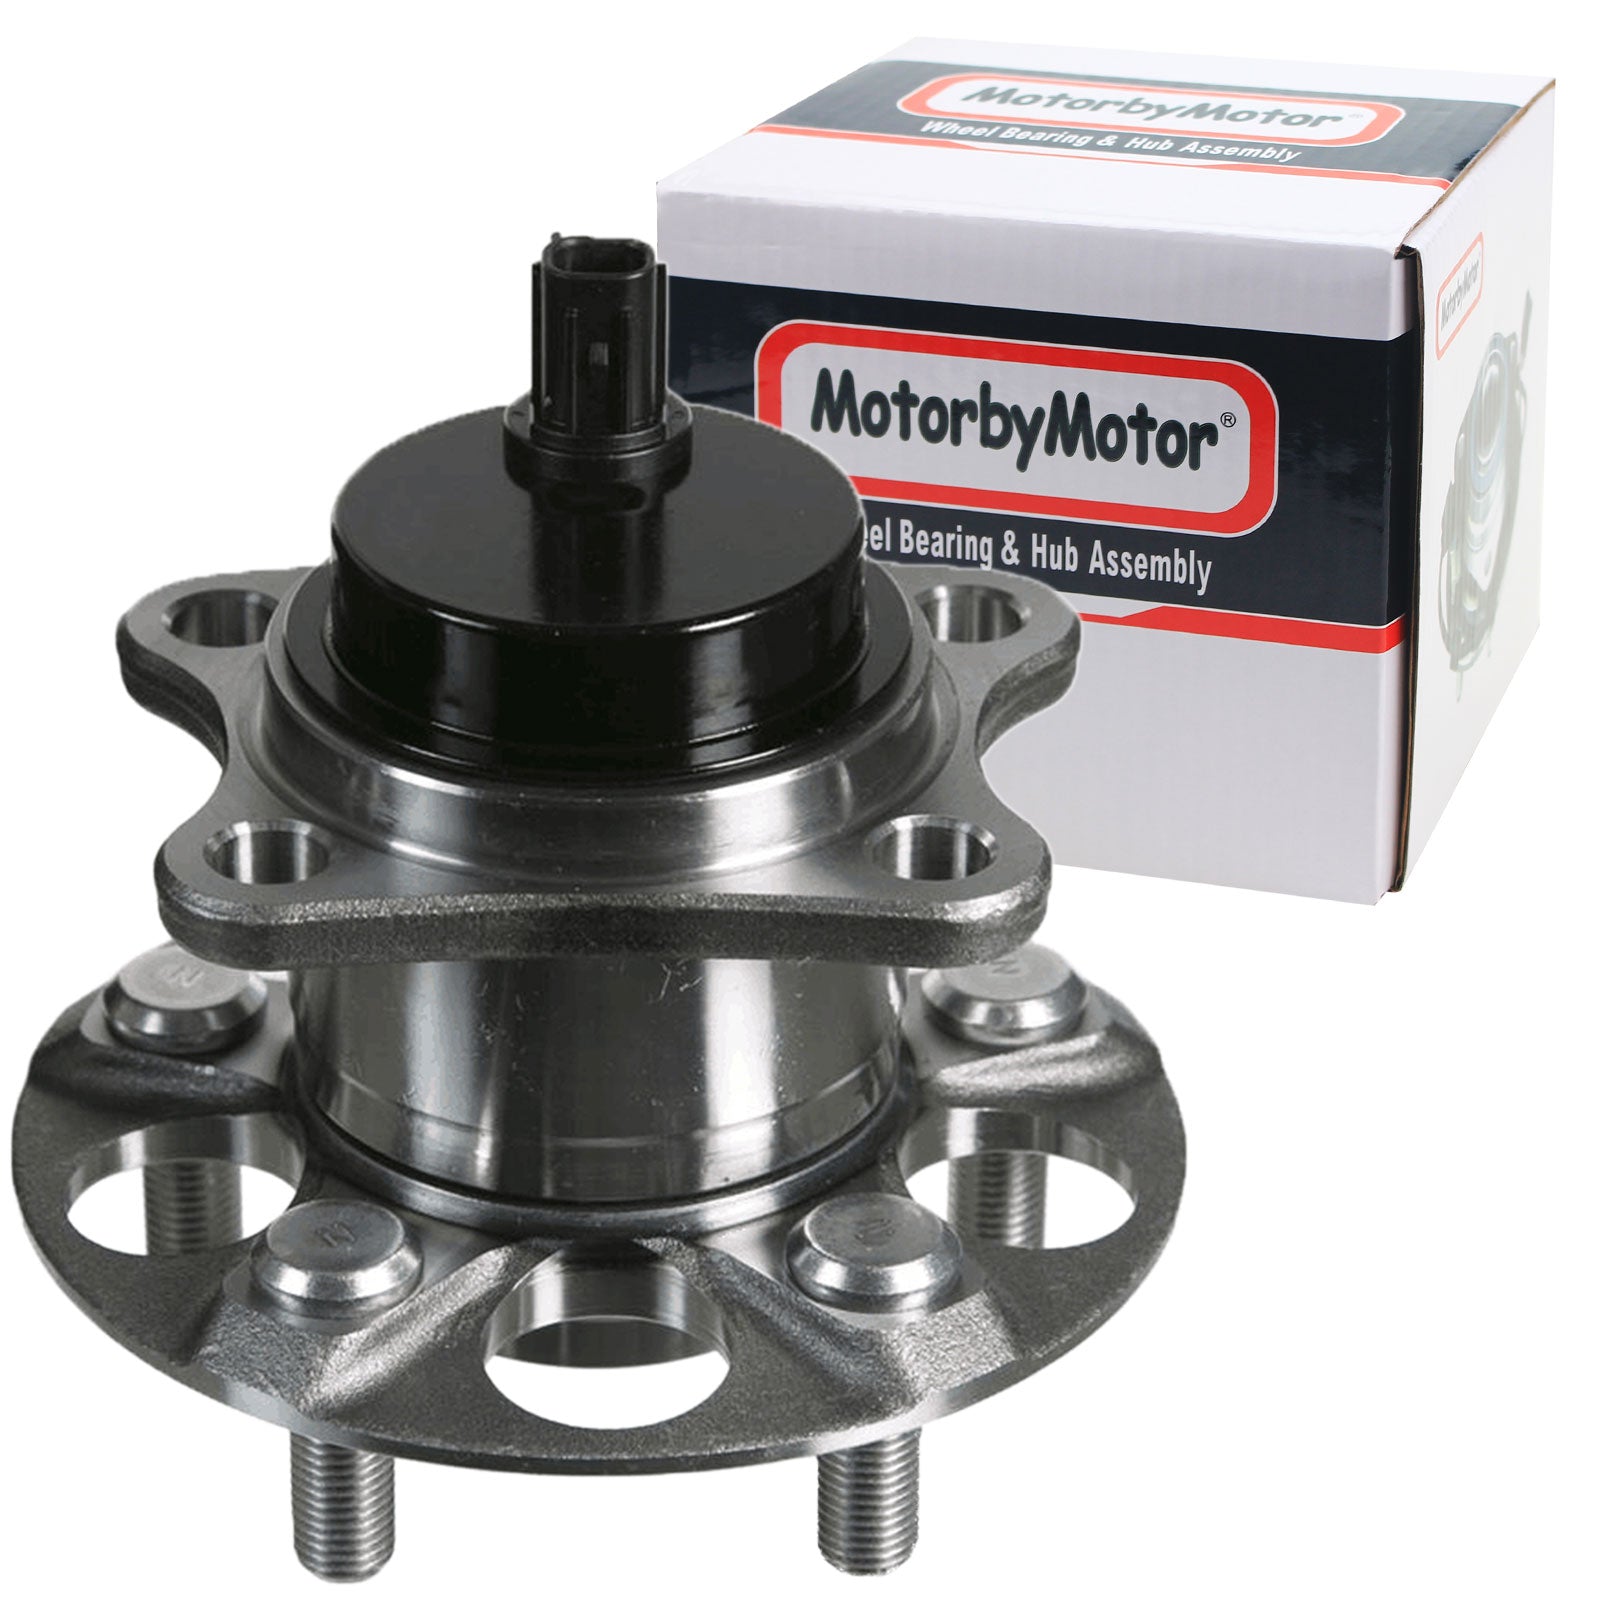 MotorbyMotor 512505 Rear Wheel Bearing and Hub Assembly with 5 Lugs Fits for 2010-2015 Toyota Prius (Will Not Fit Toyota Prius C and Prius V), 2012-2015 Toyota Prius Plug-in Hub Bearing-w/ABS MotorbyMotor